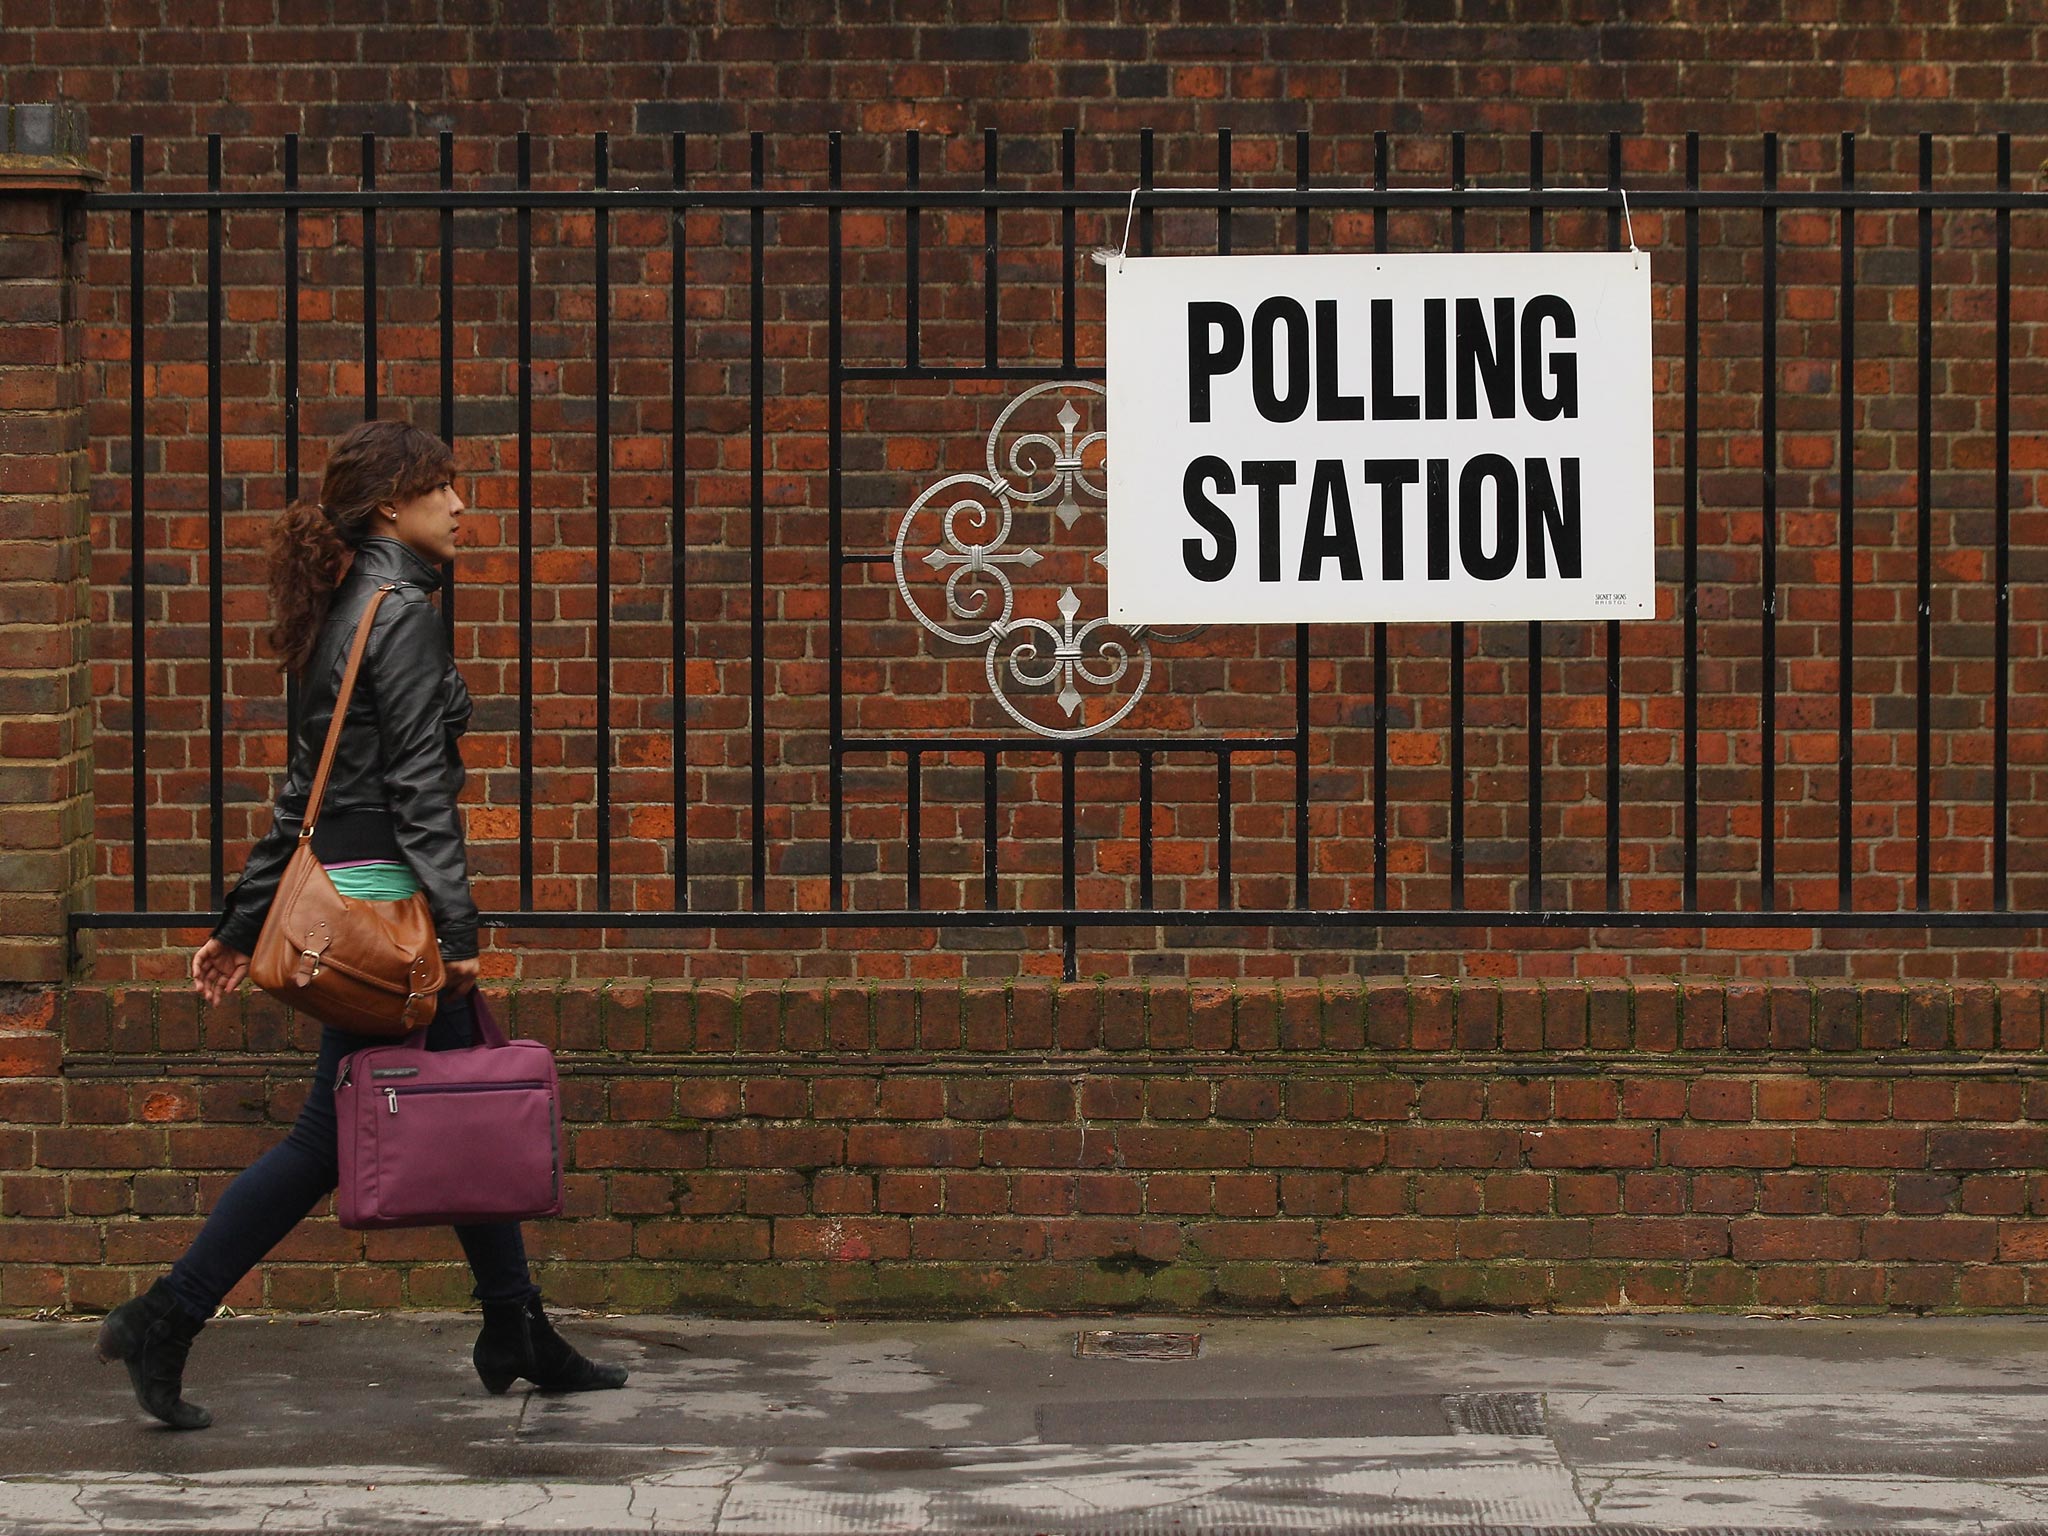 Under the plan, schools and colleges would be legally compelled to supply details of 16 and 17 year old students to electoral registration officers